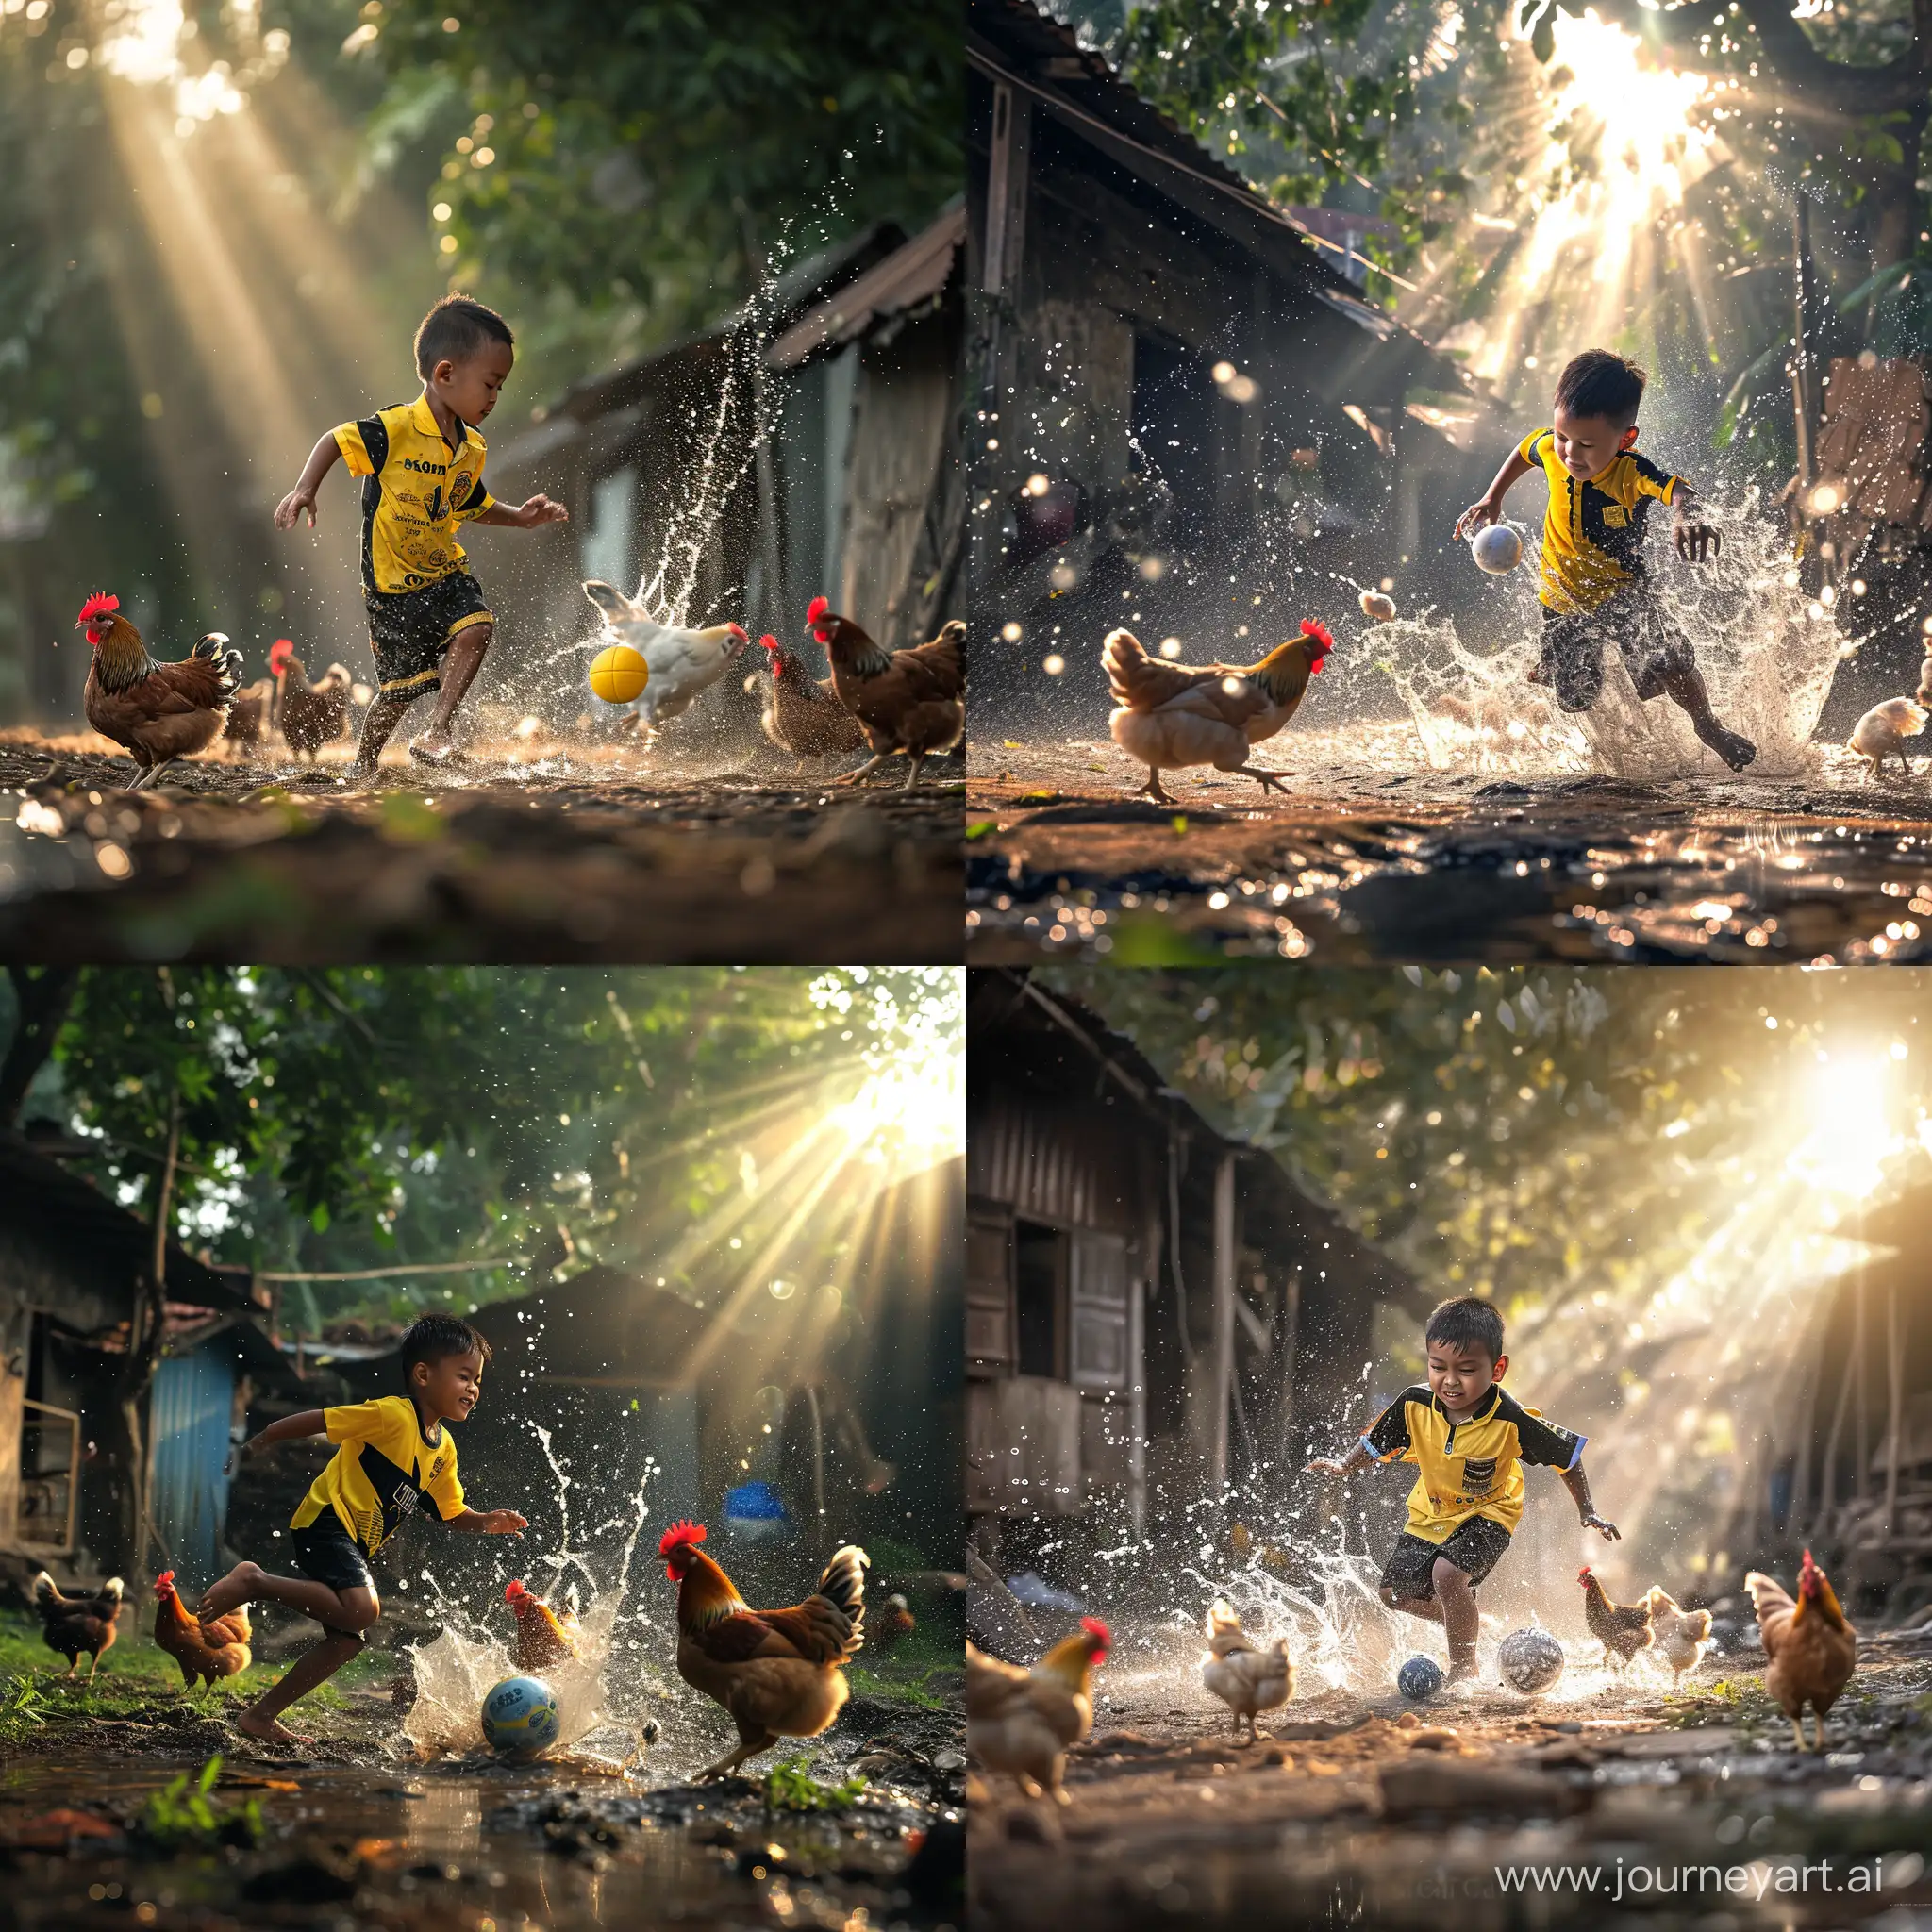 Ultra realistic a Malay boy wering yellow and black shirt is running after a ball in the morning atmosphere in the village, with the rays of the rising sun. there are chickens running around. on the ground there is a splash of water. canon eos-id x mark iii dslr --v 6.0